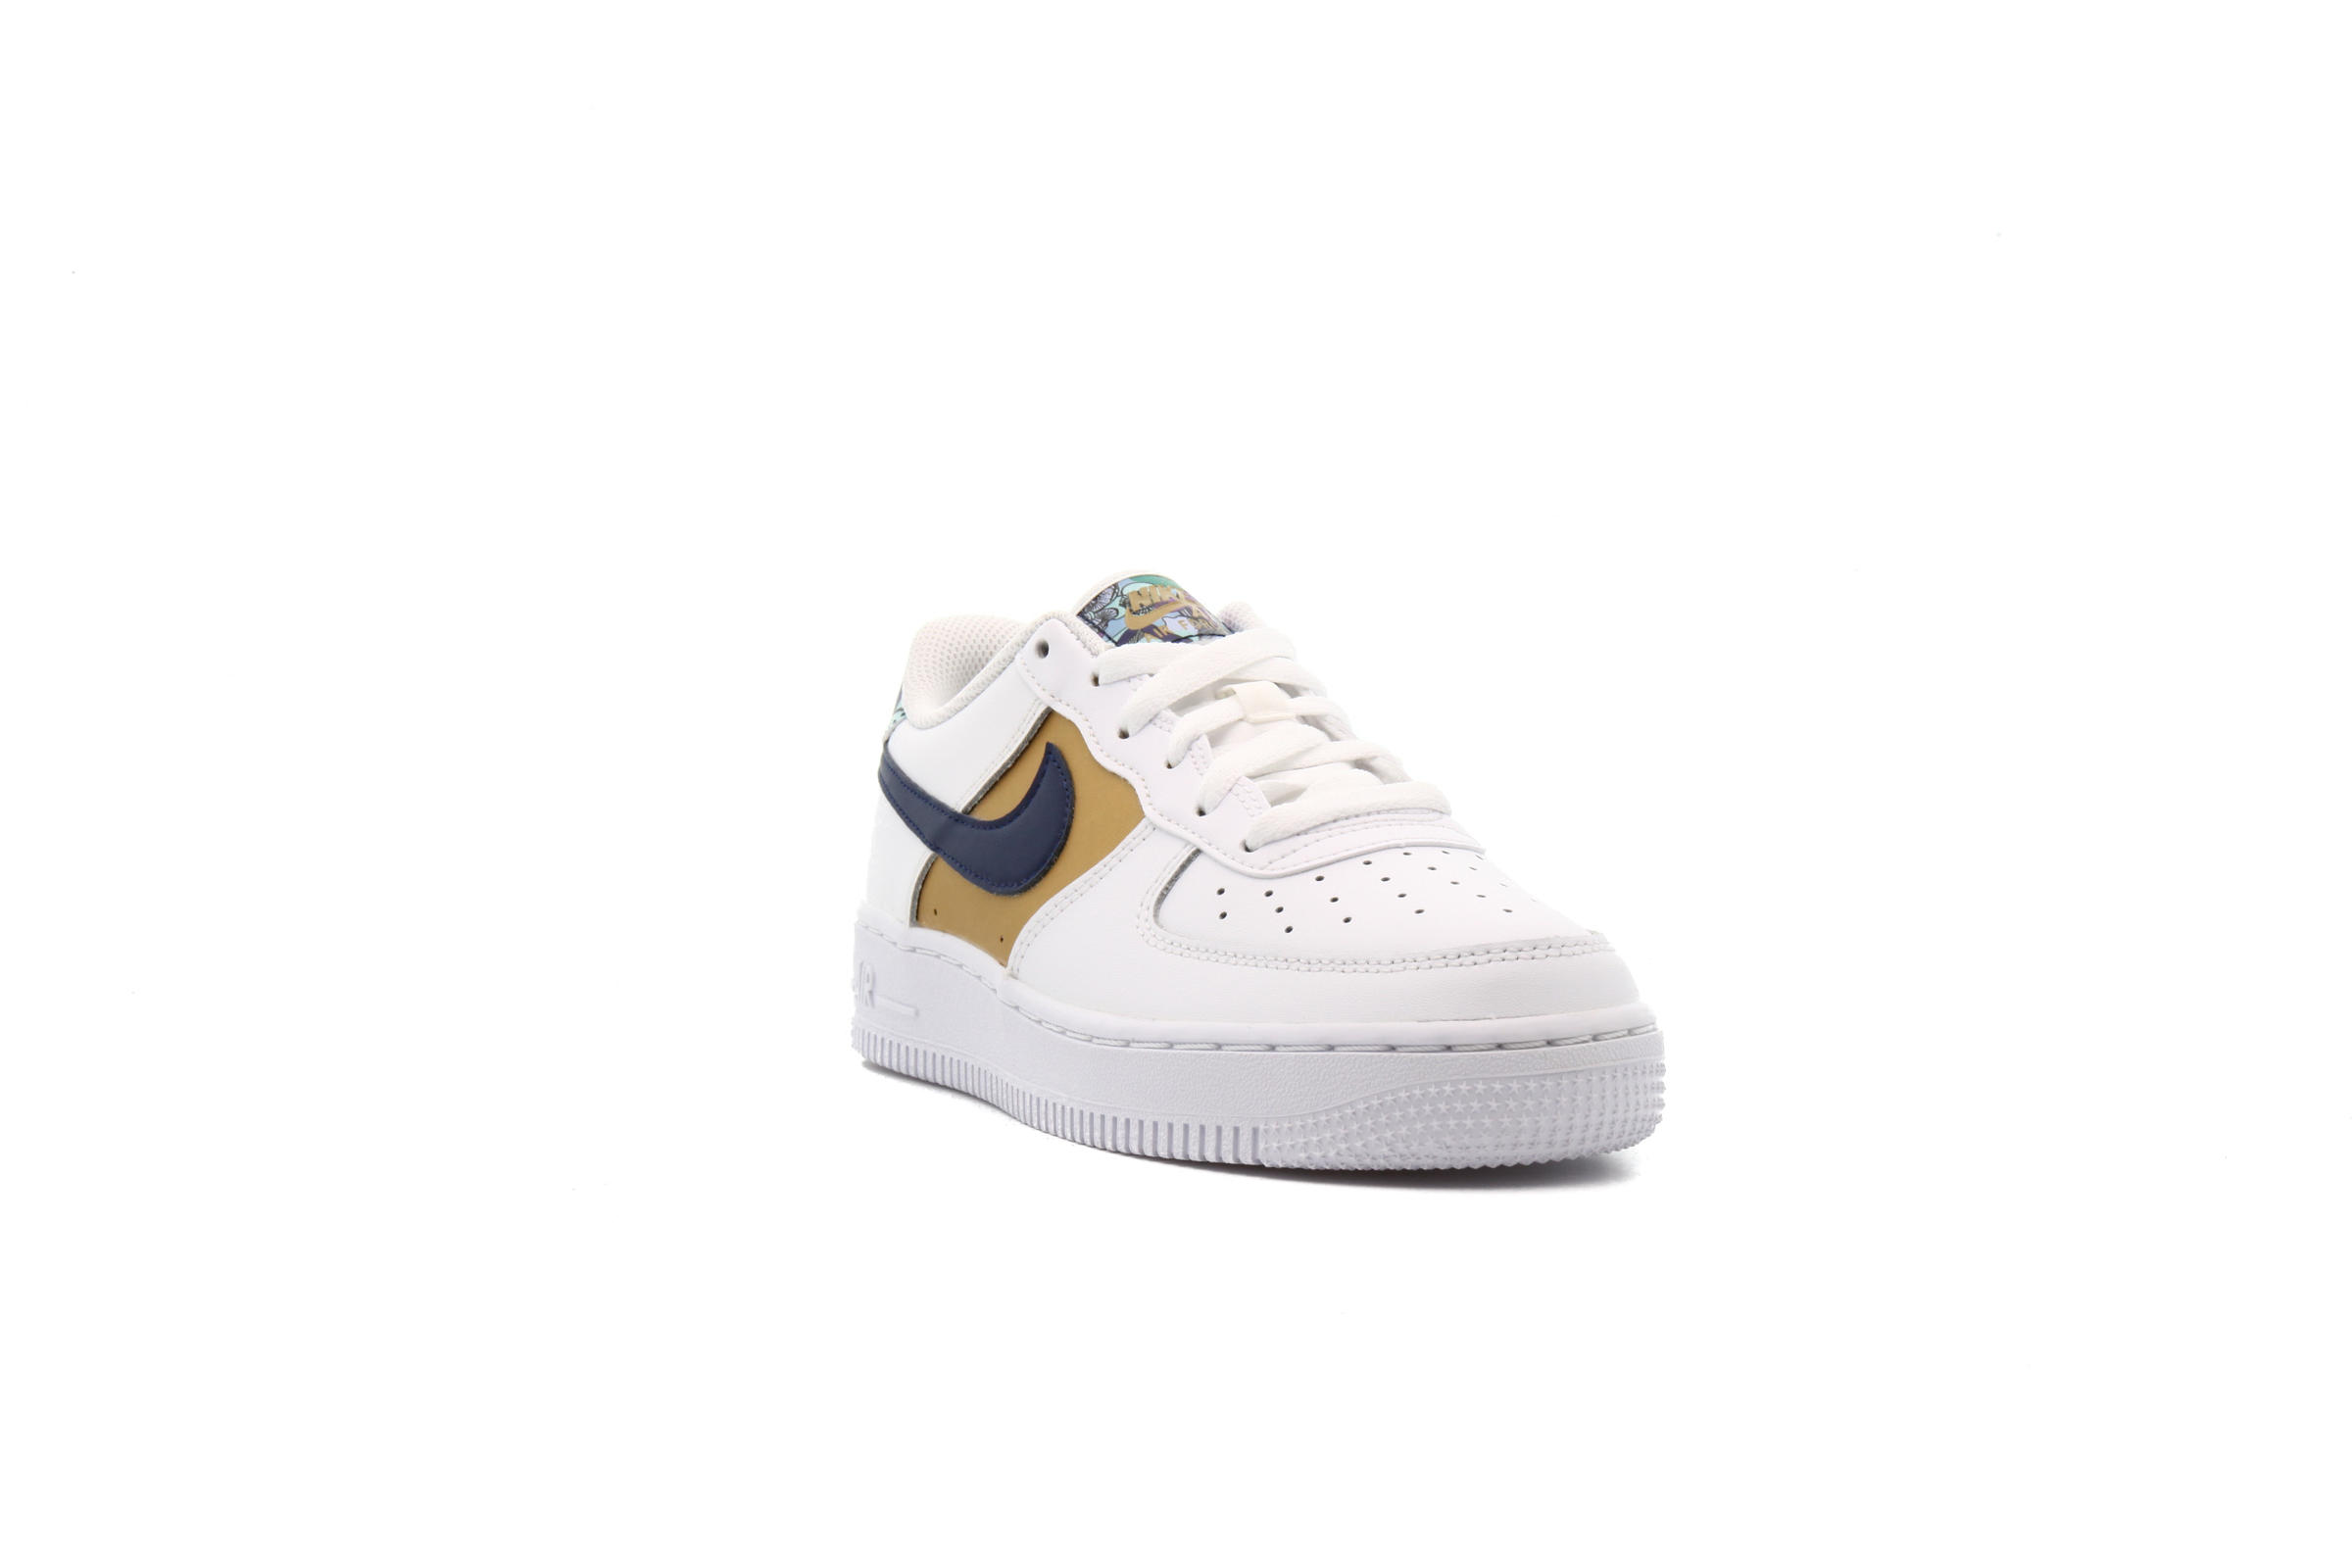 Nike AIR FORCE 1 LOW LV8 GS "WHITE"